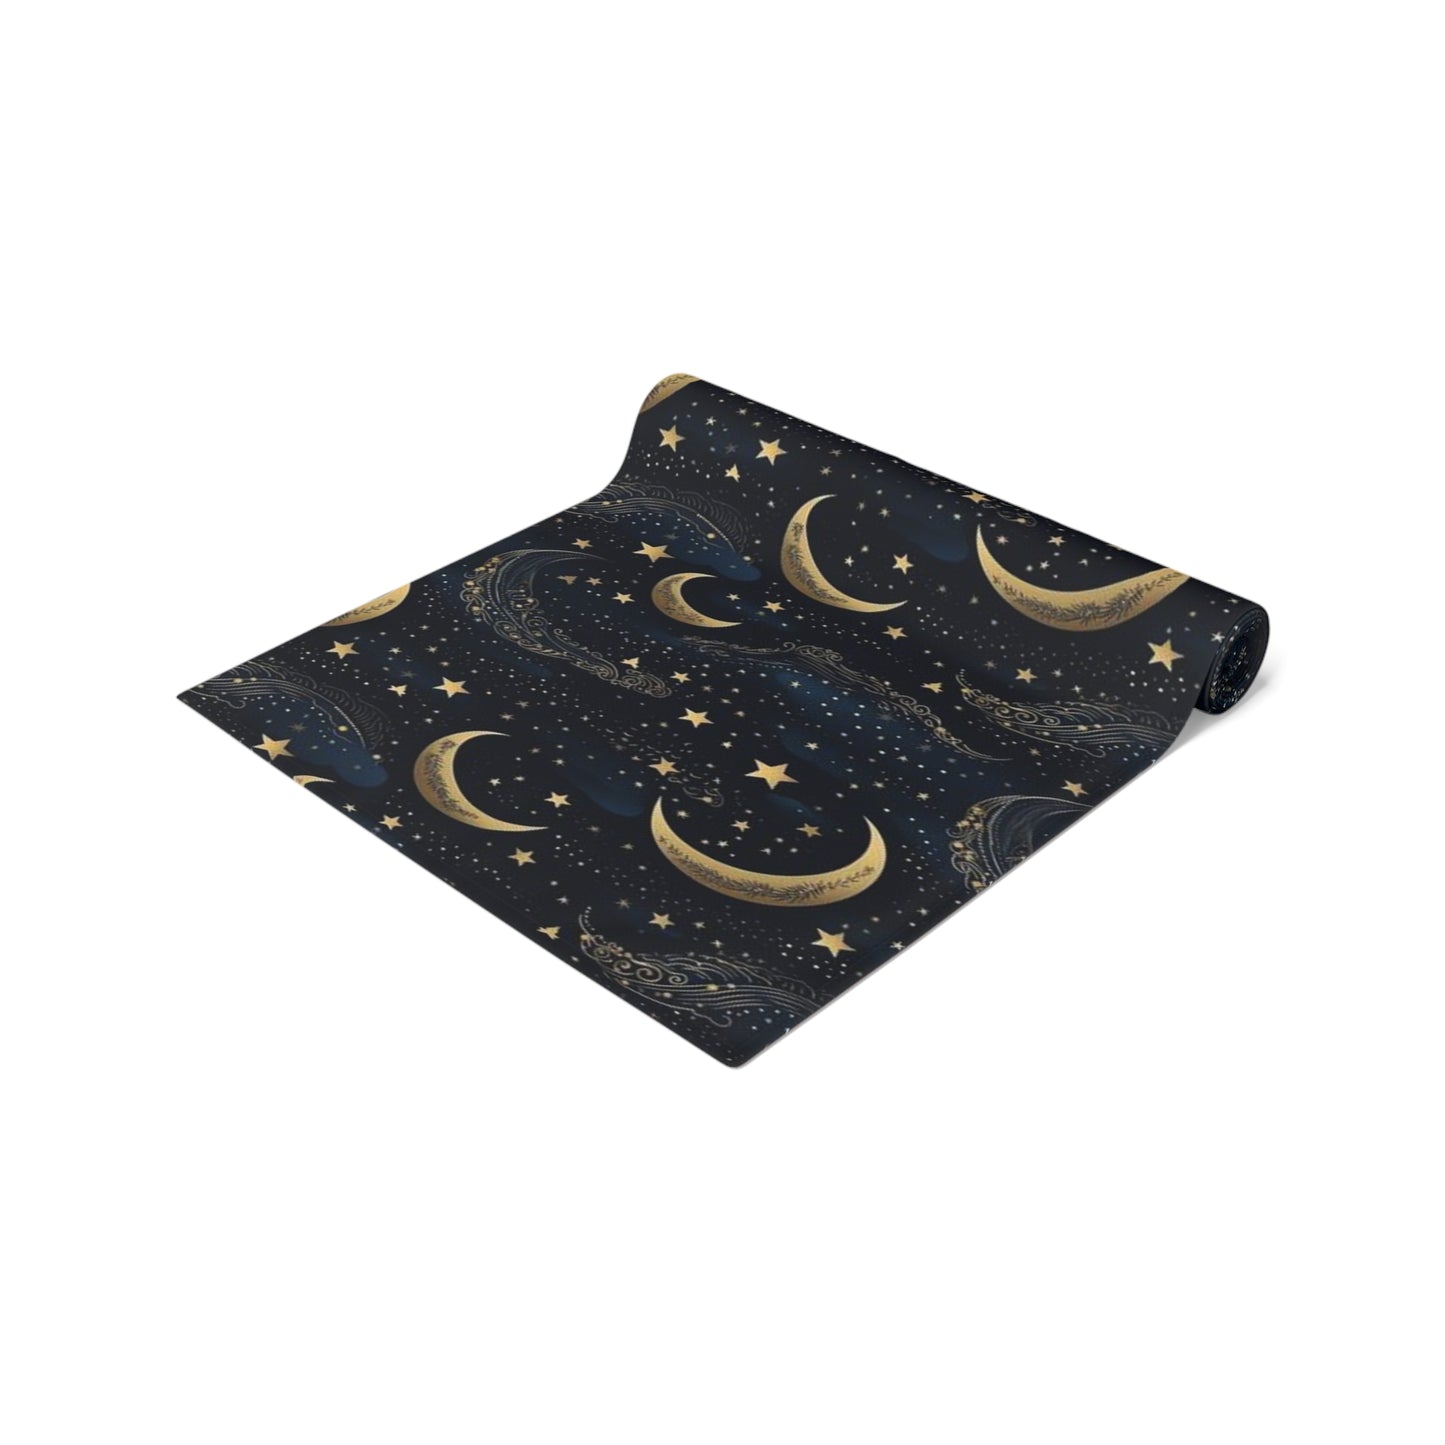 Half Moon Stars Table Runner, Starry Night Sky black Gold Clouds Cottagecore Witchy Decor Cloth Decoration Tablecoth Cotton Dining Linen Starcove Fashion